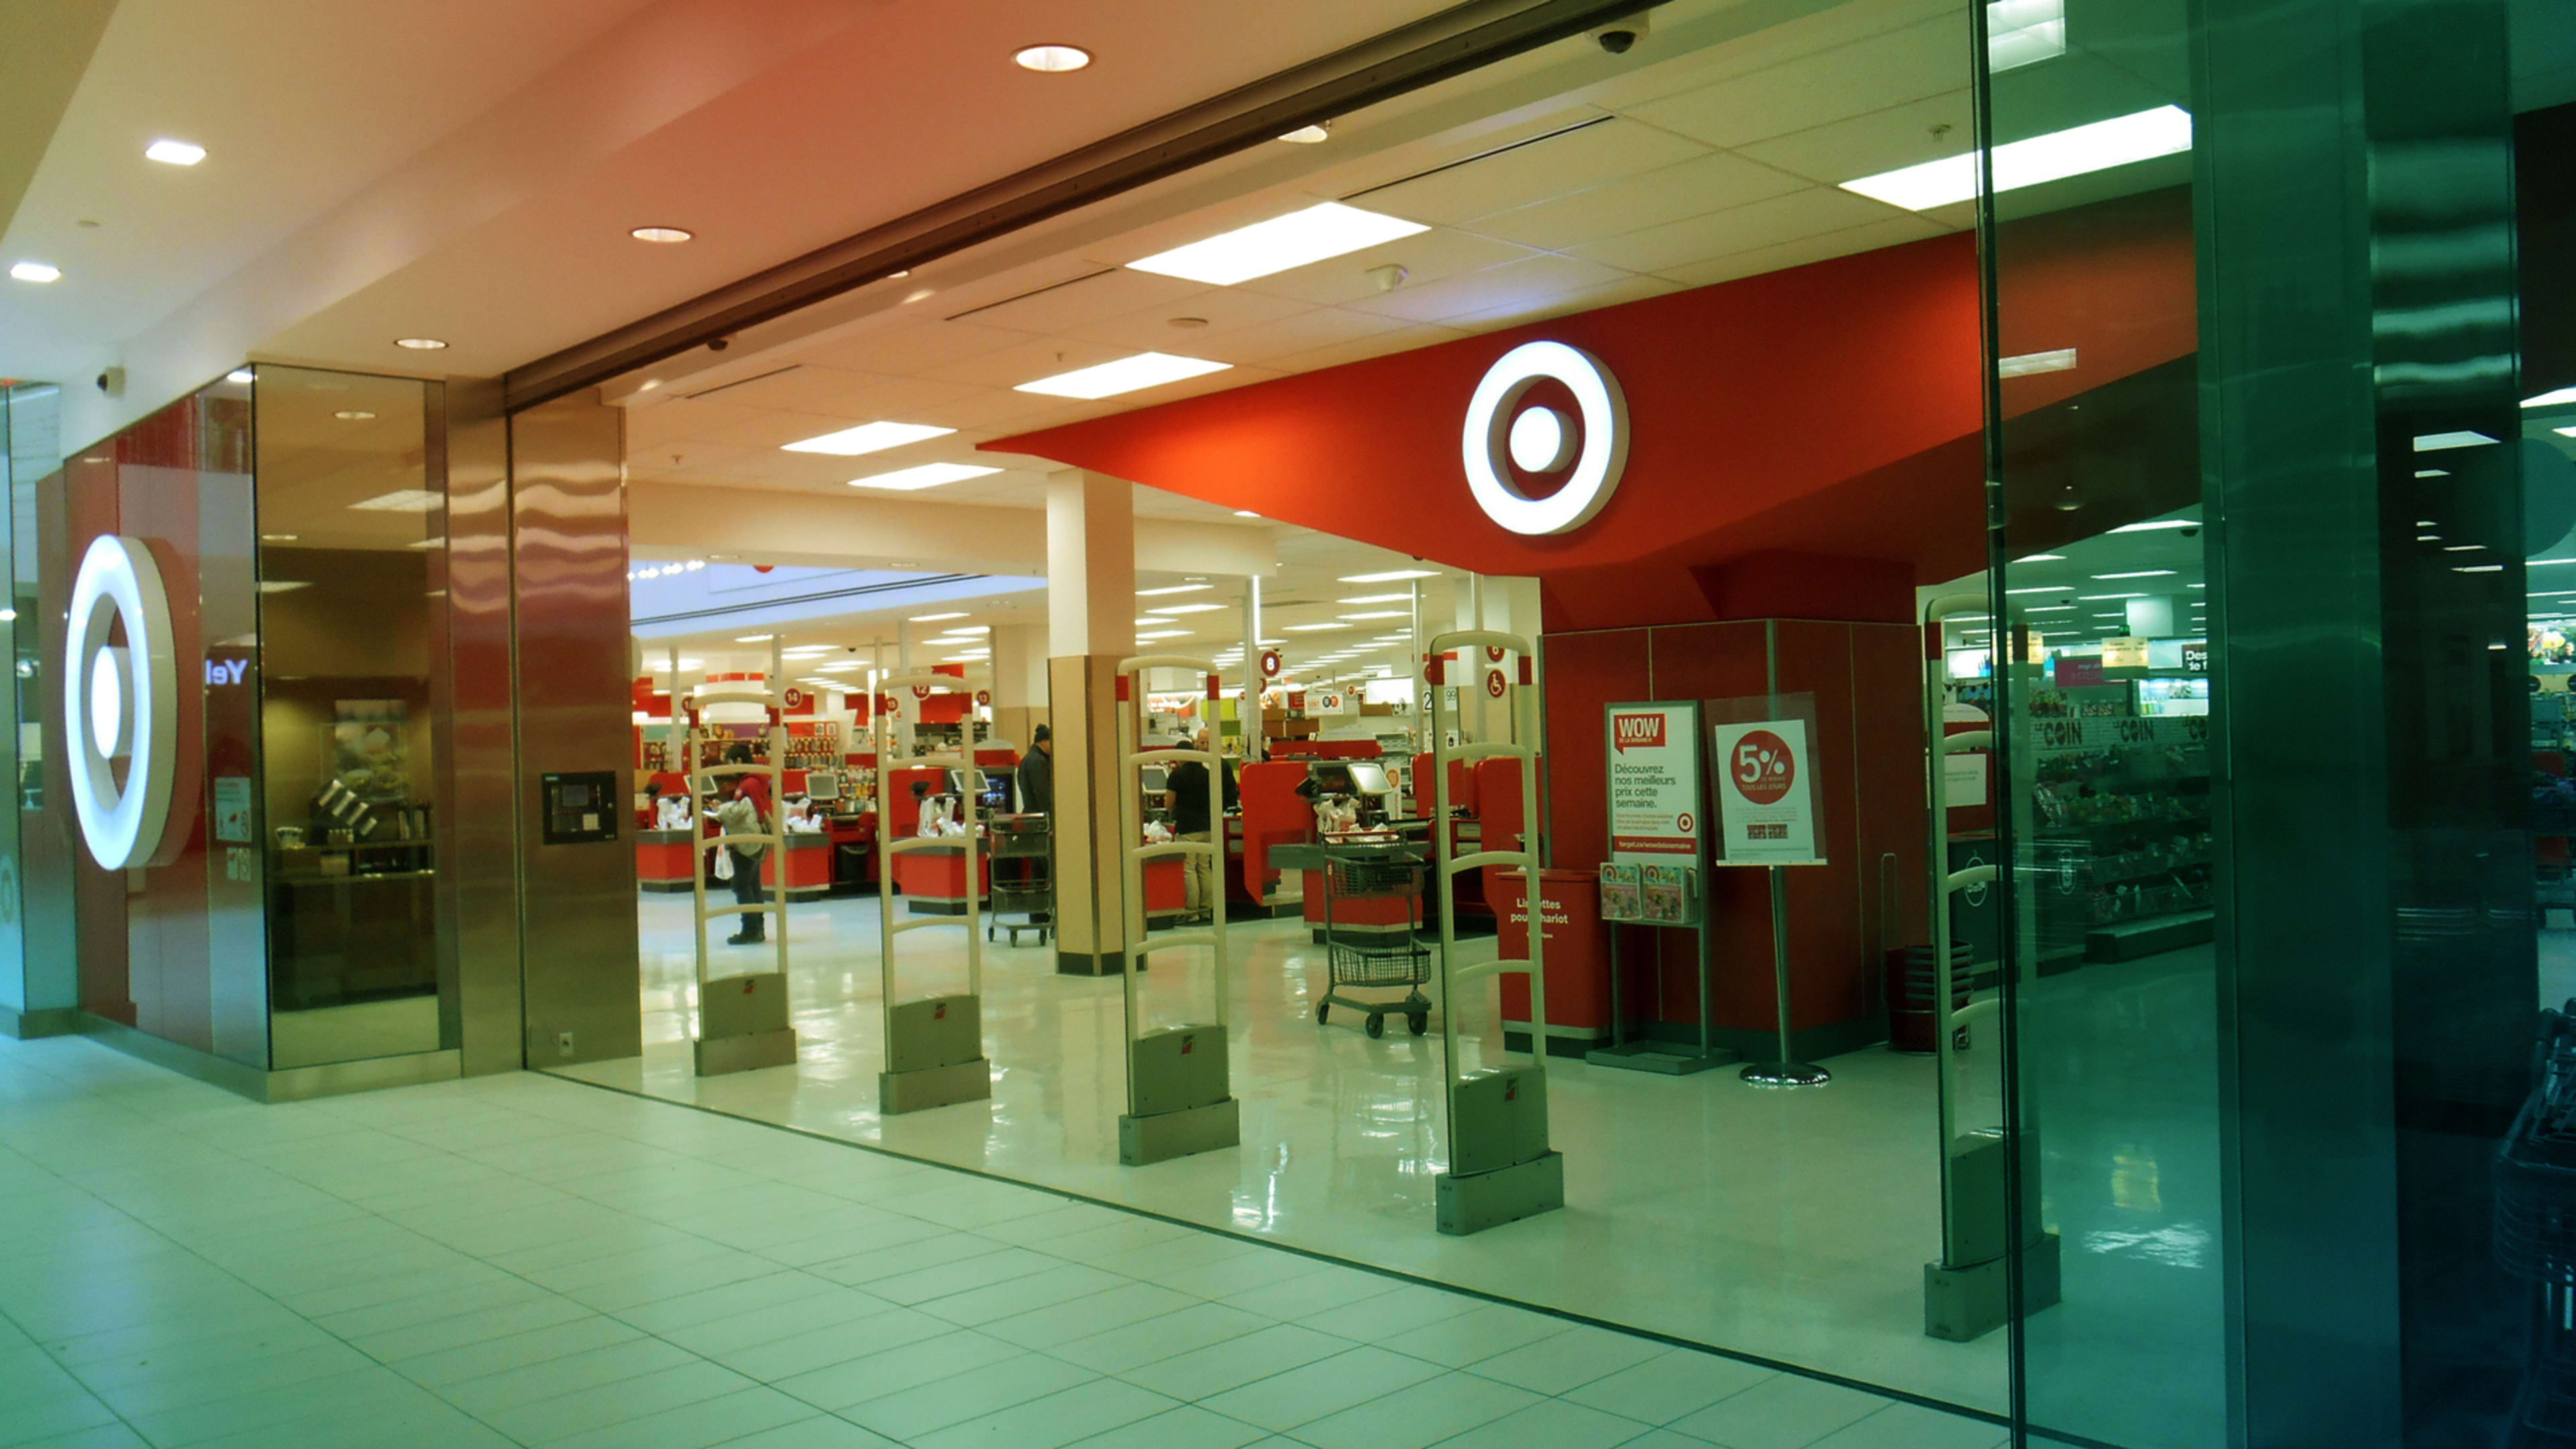 Target takes aim at Amazon and Walmart with same-day delivery